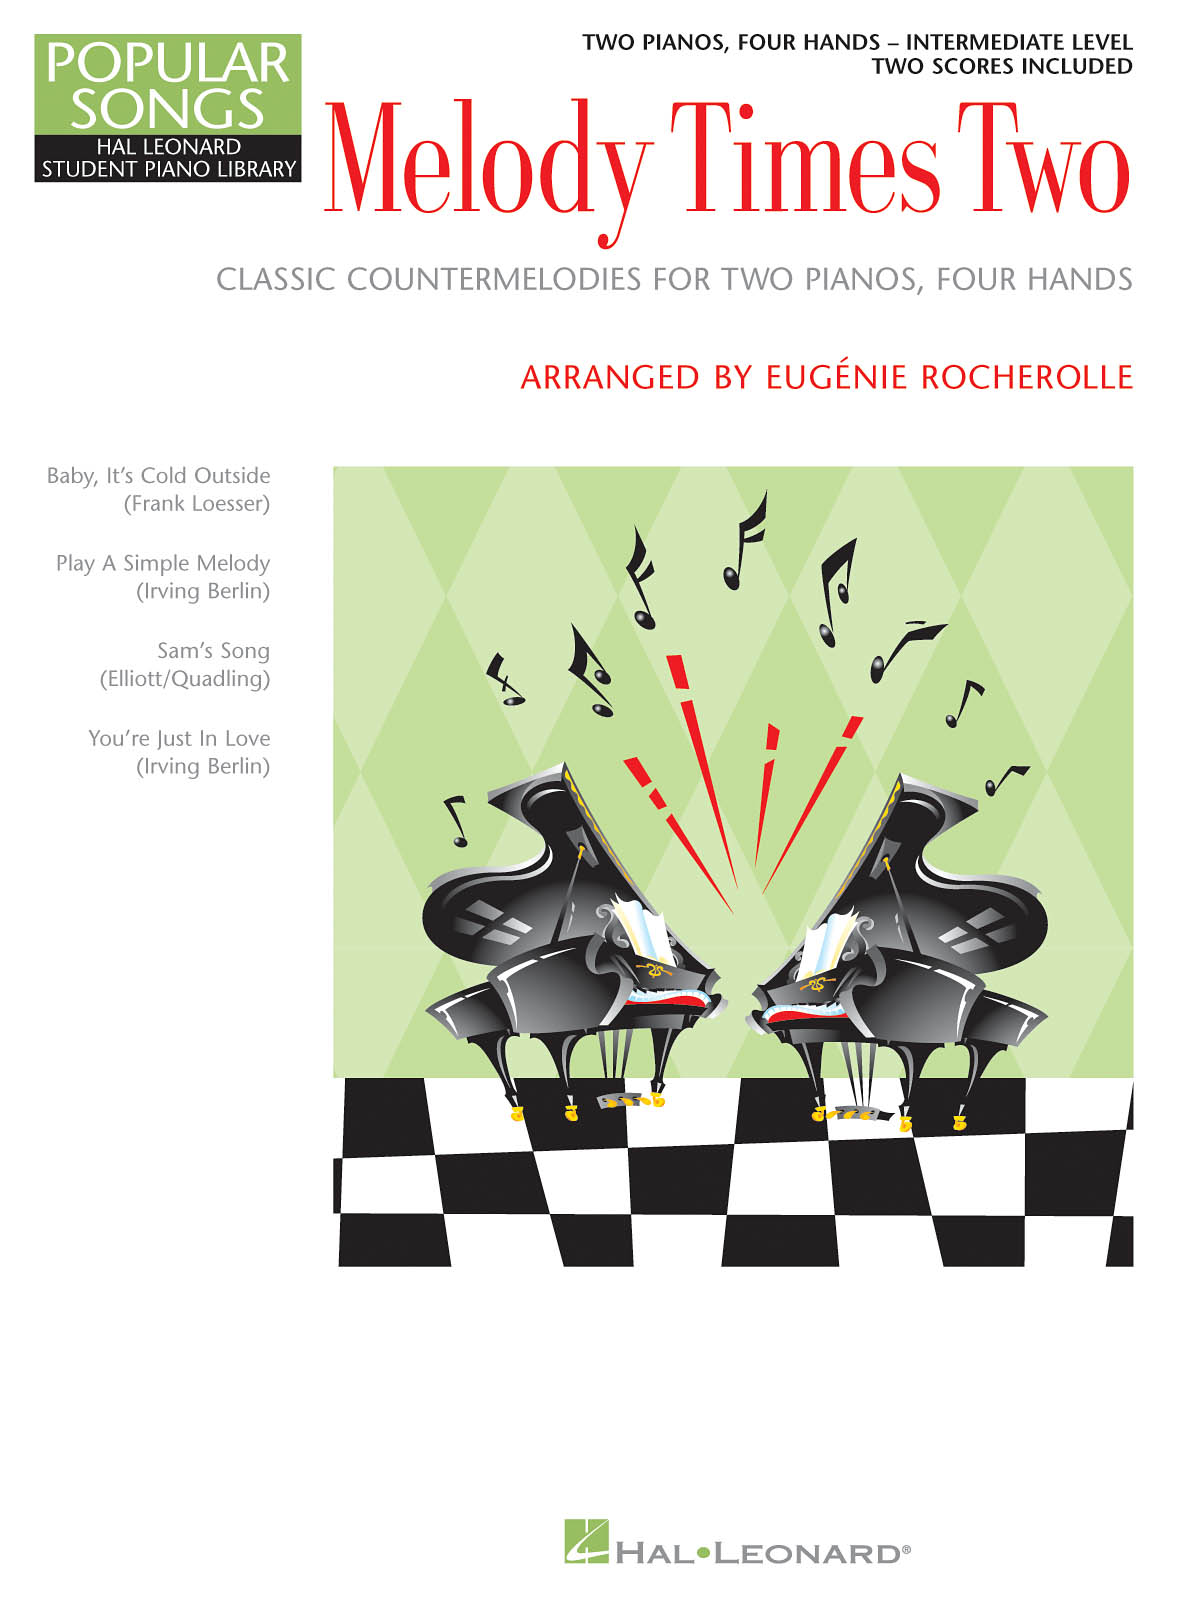 Eugenie Rocherolle - Melody Times Two: Piano 4 Hands: Instrumental Album